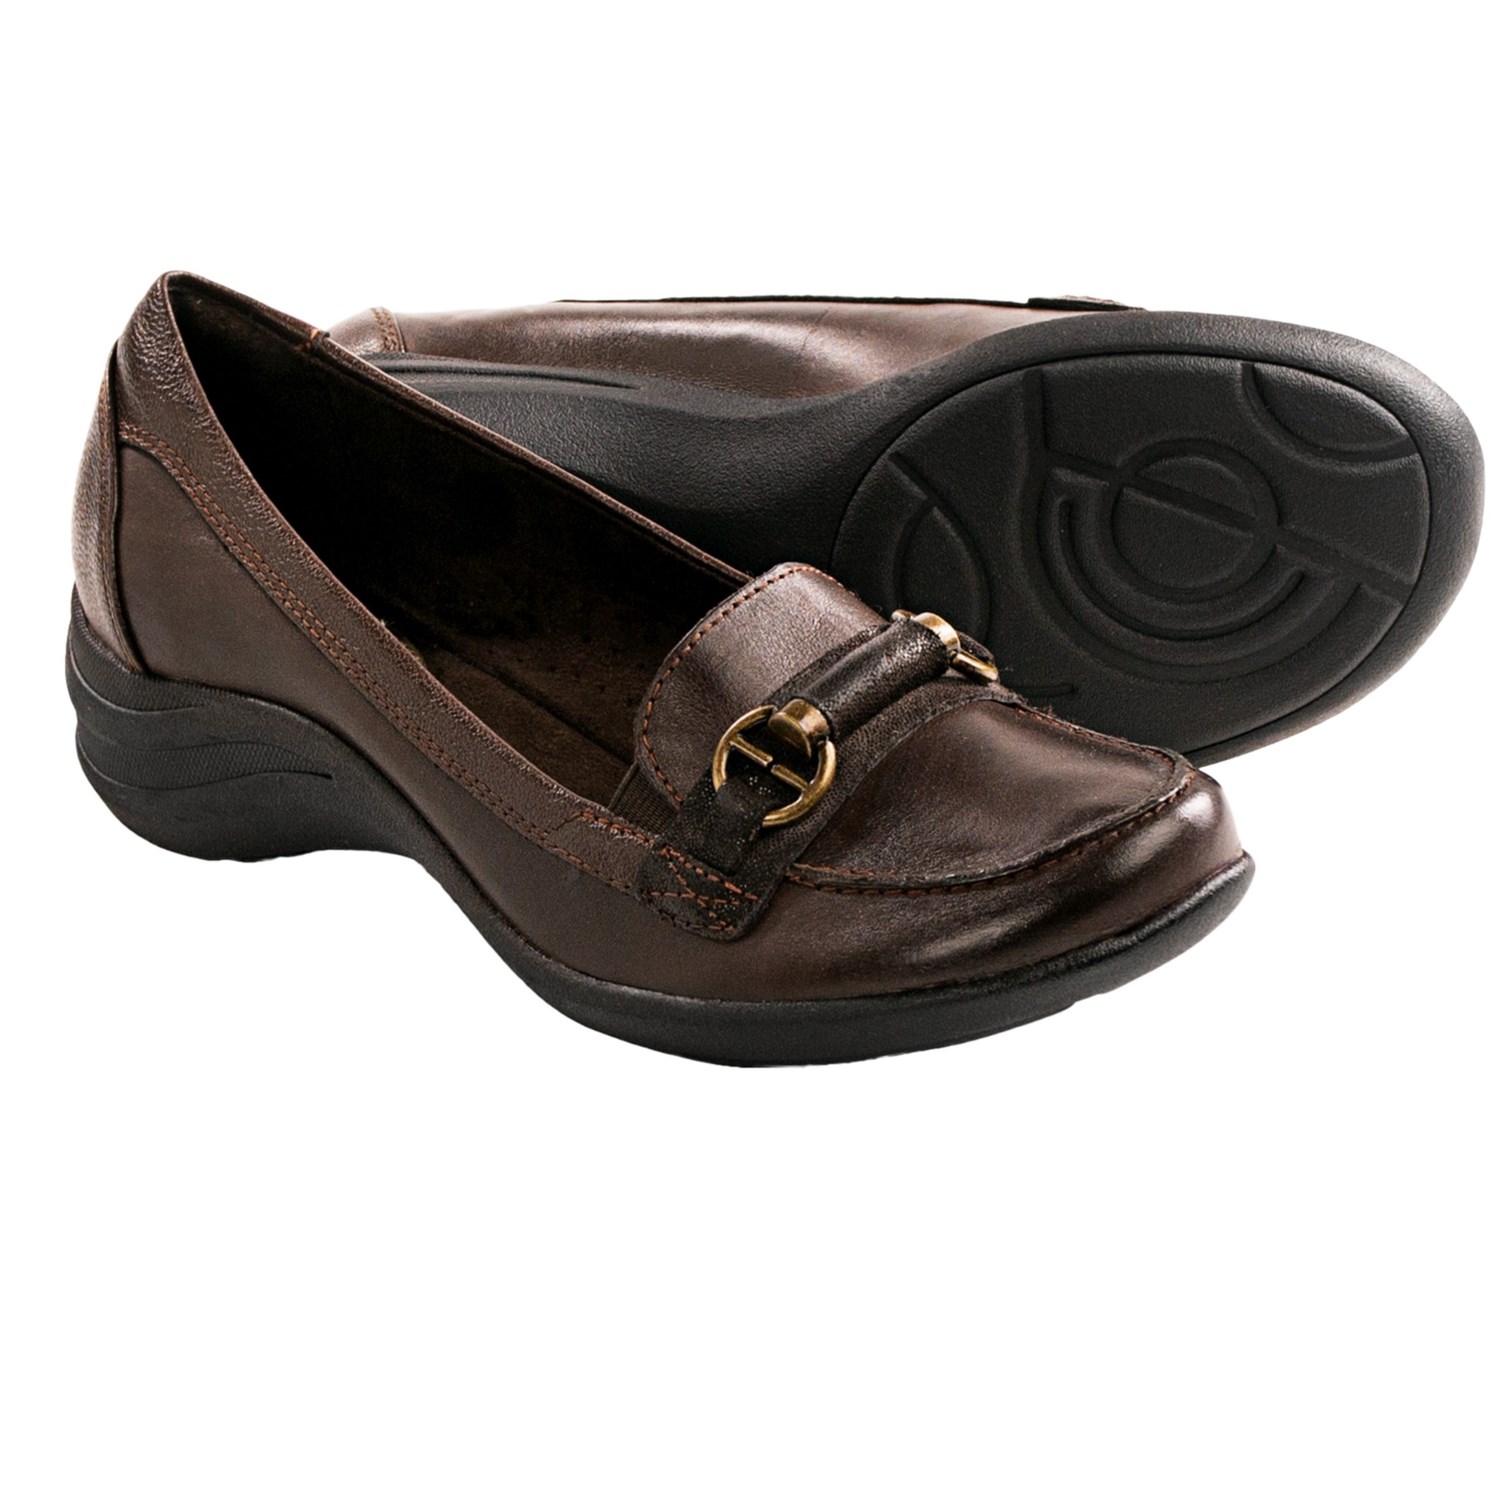 Hush Puppies Kalani Alternative Shoes - Loafers (For Women) in Dark ...